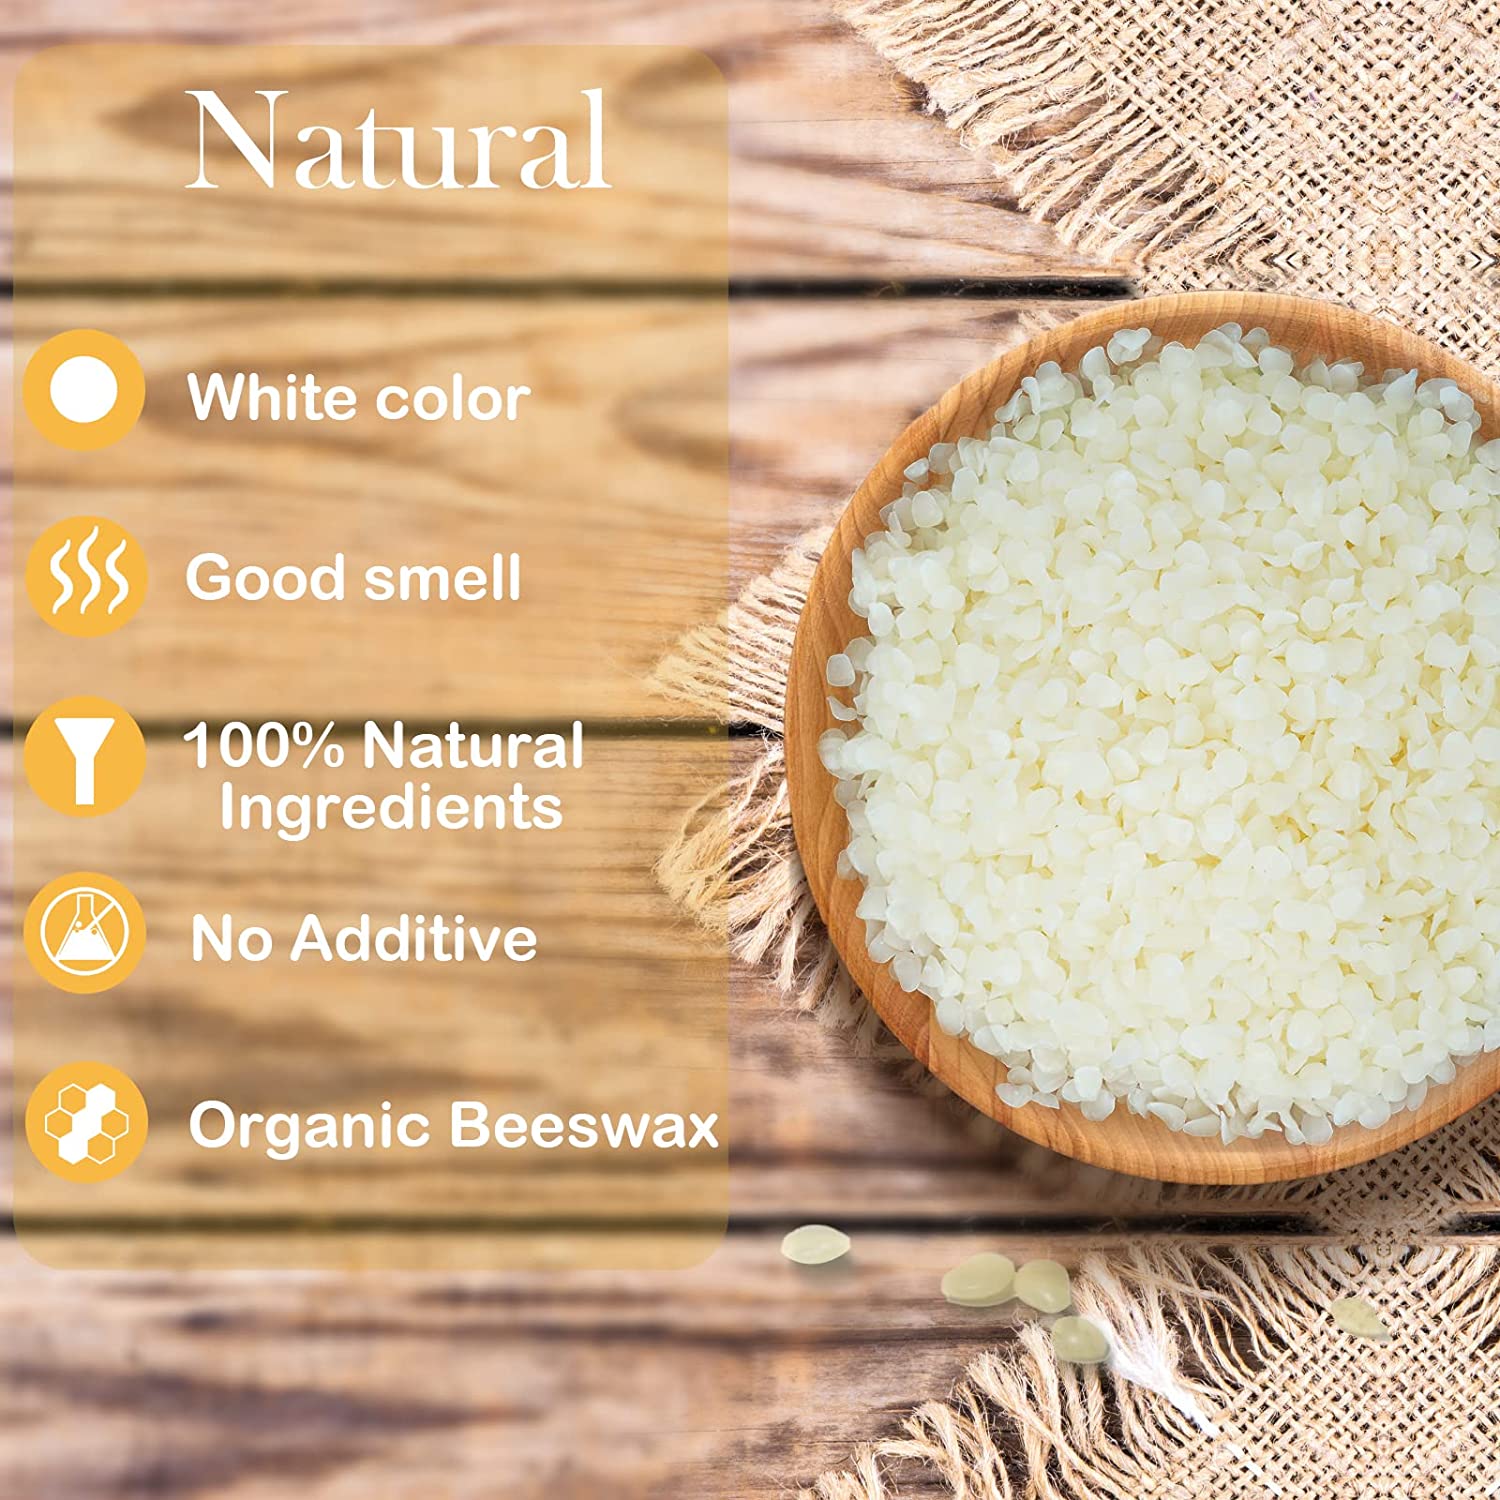 100% Natural White Beeswax Pellets for Skin Products, Candles and